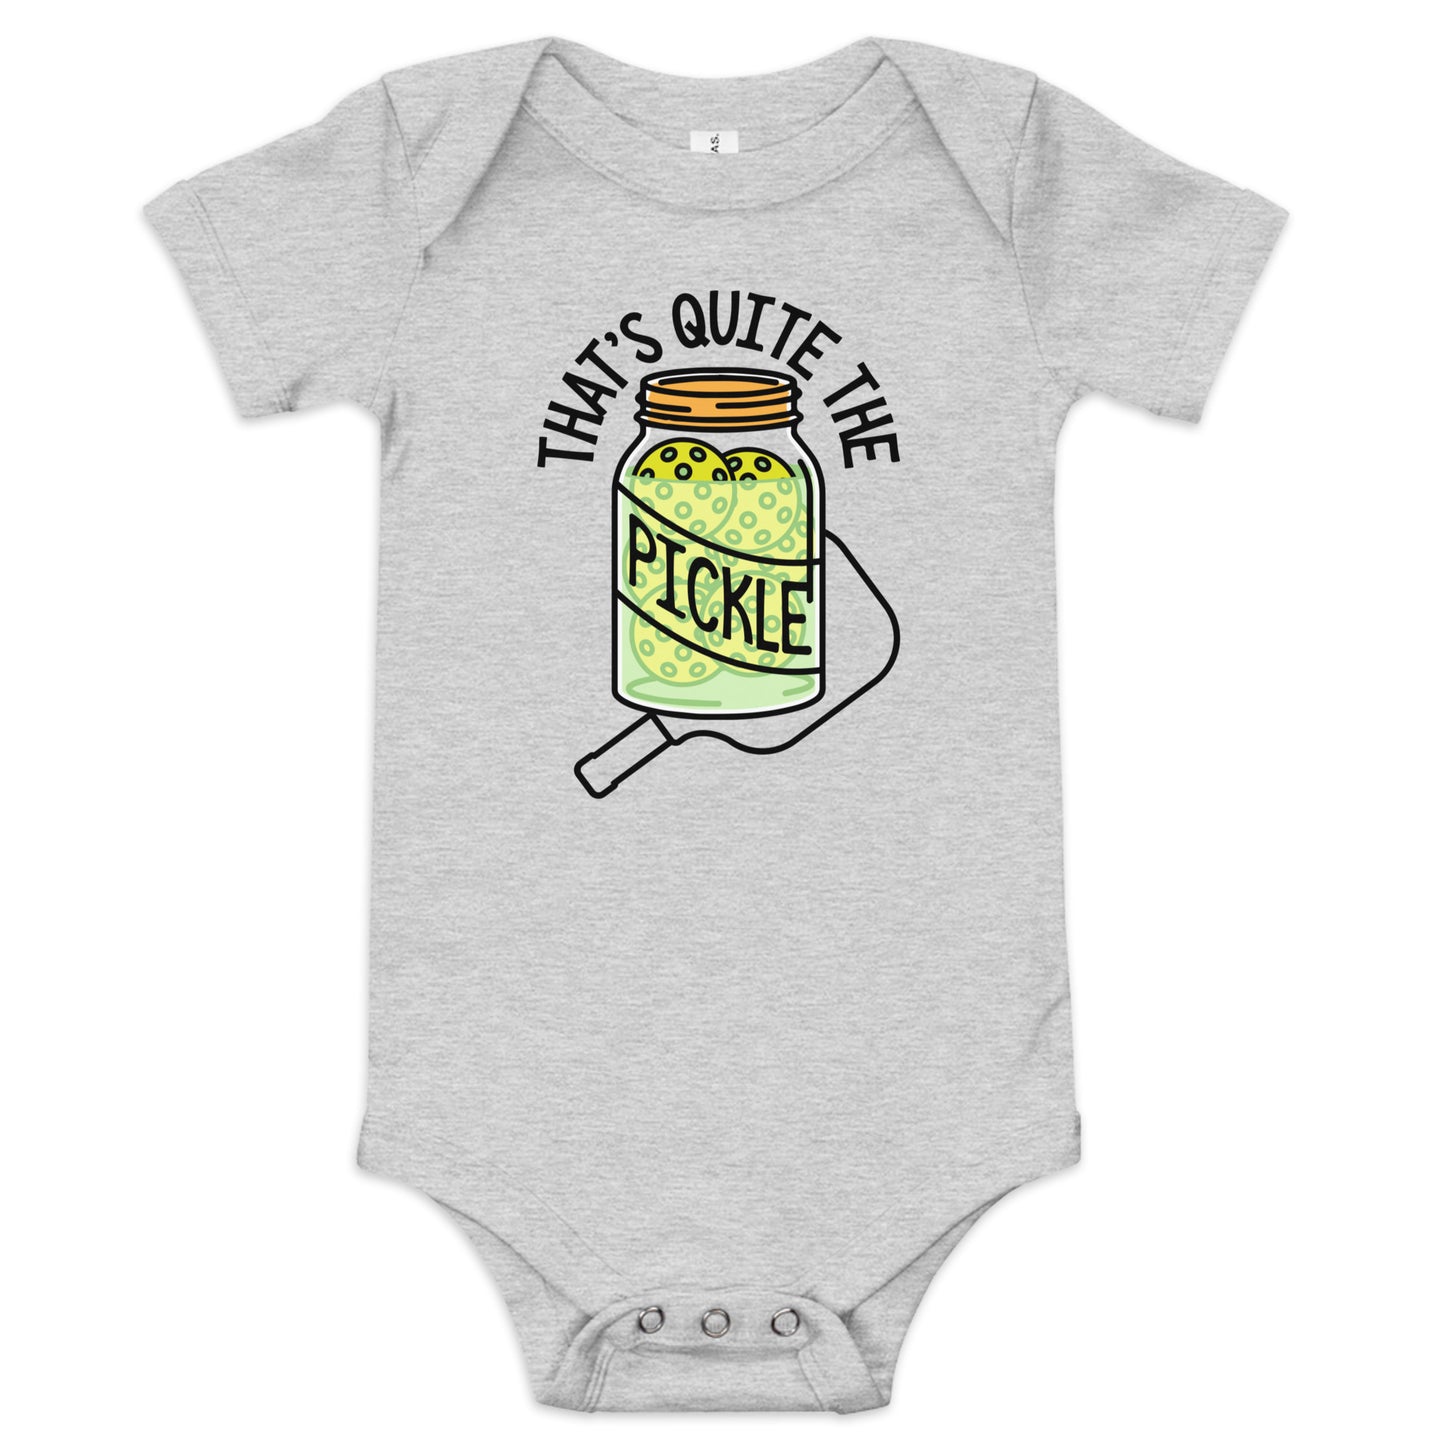 That's Quite The Pickle Kid's Onesie